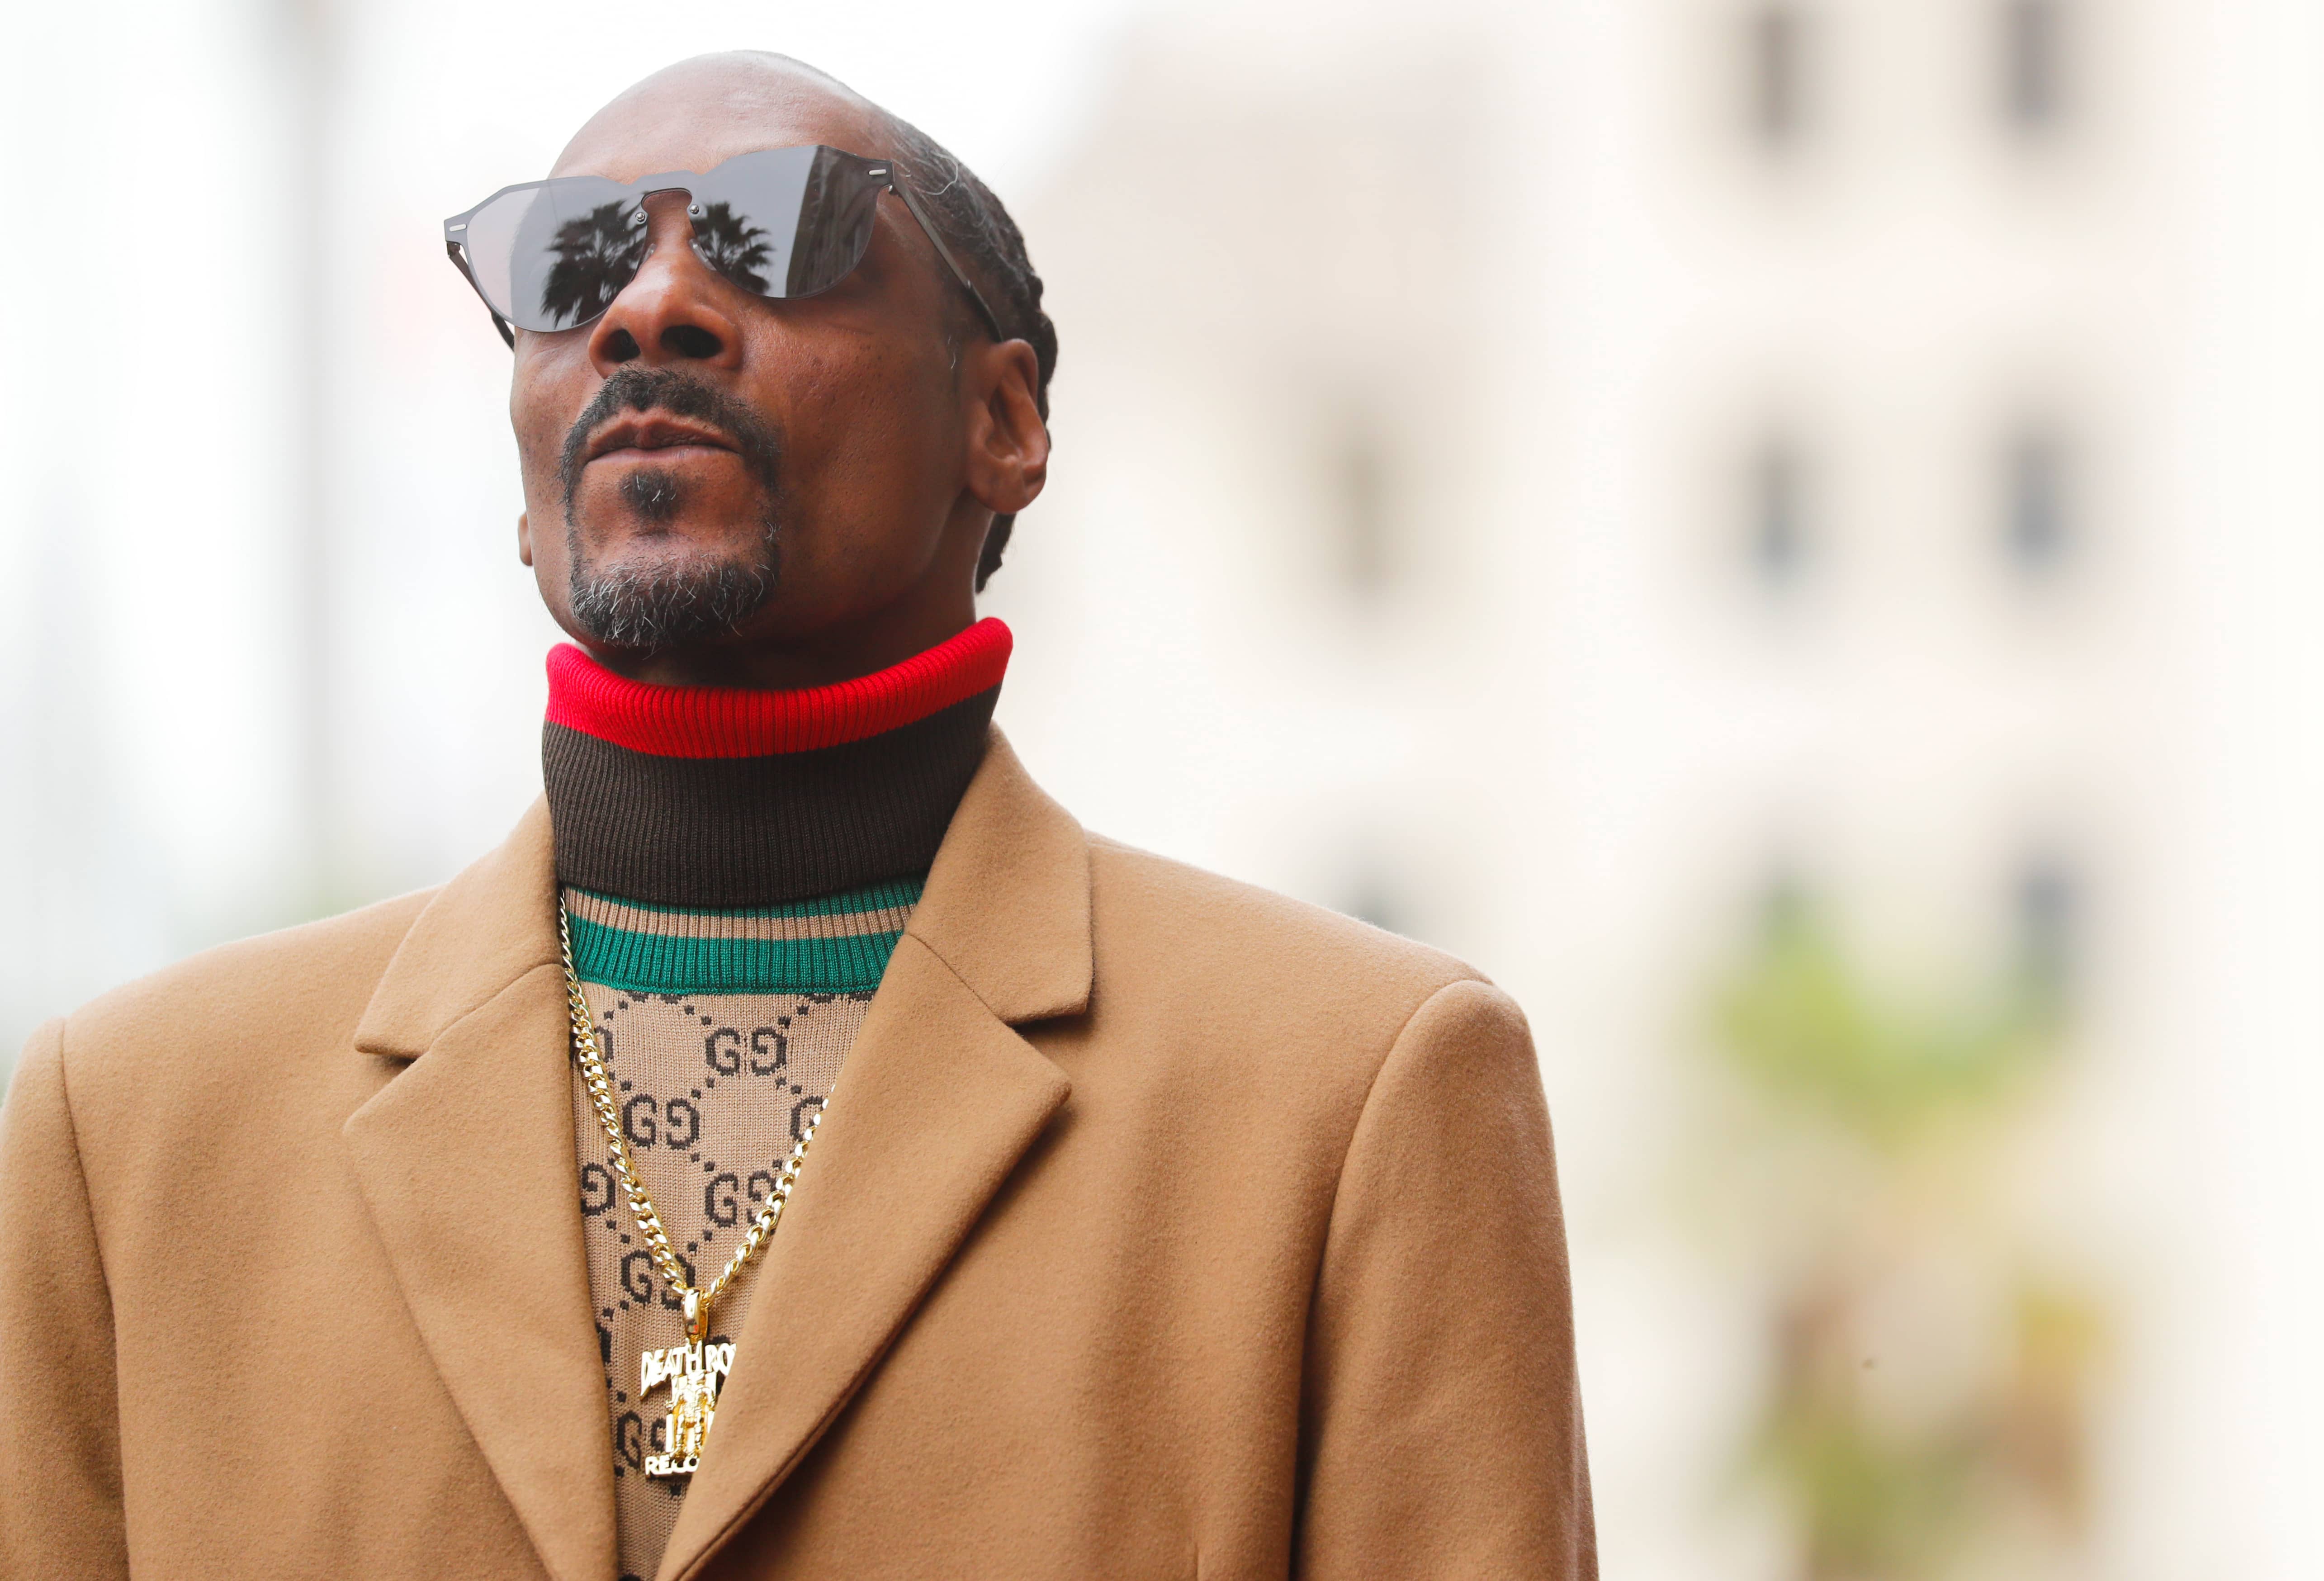 rapper-snoop-dogg-receives-his-star-on-the-hollywood-walk-of-fame-in-los-angeles